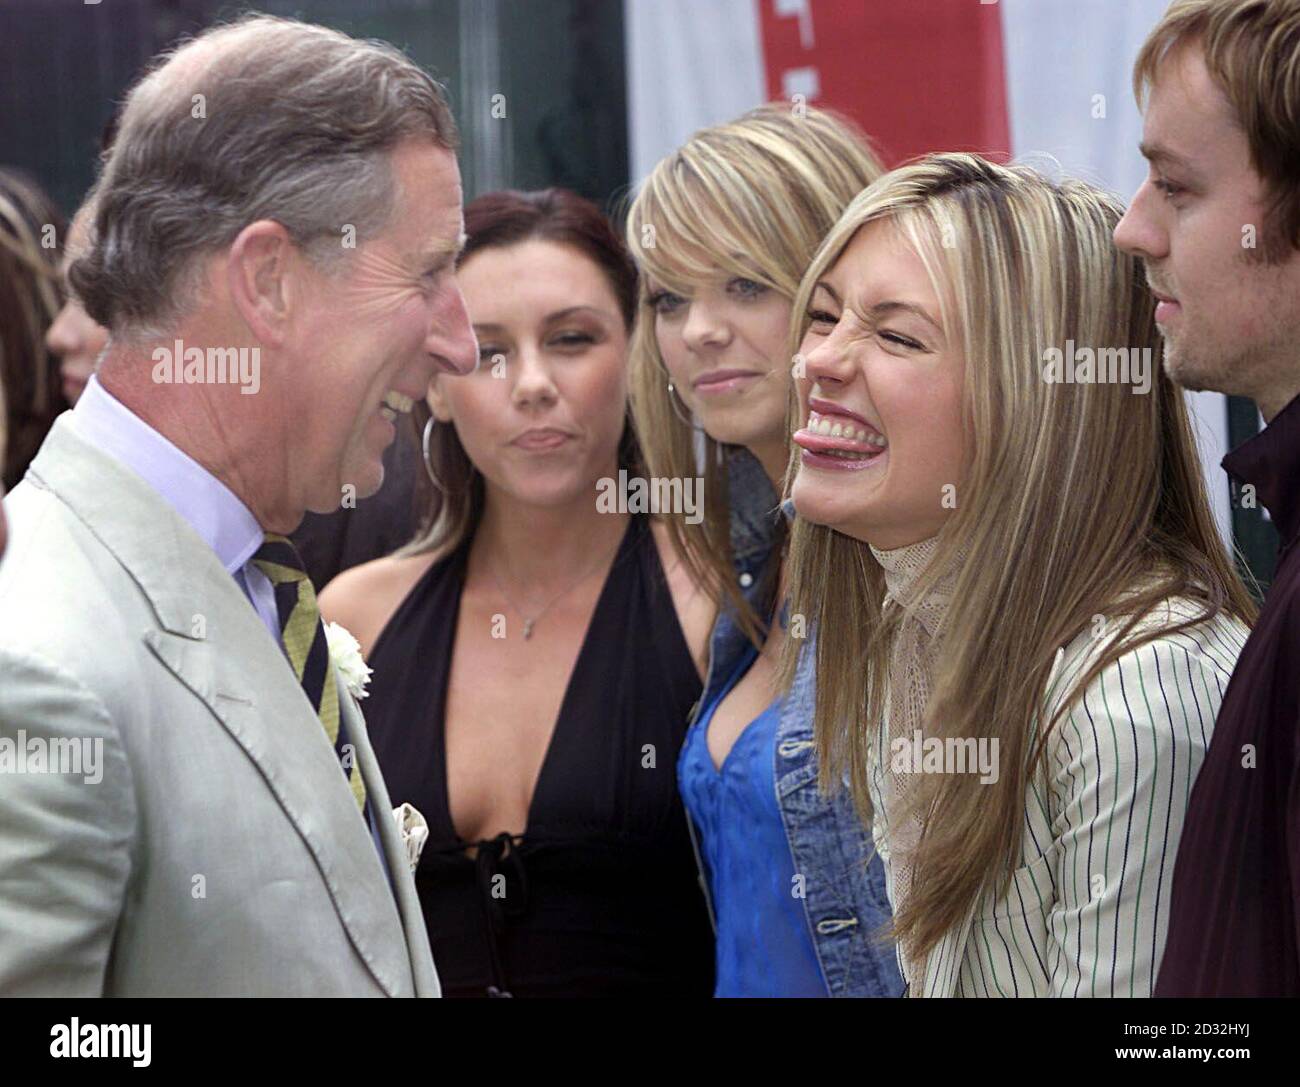 The Prince of Wales meets Cat Deeley (second right) and Liz McClarnon (centre) from Atomic Kitten during the Capital Radio Party in the Park at Hyde Park in London. Stock Photo